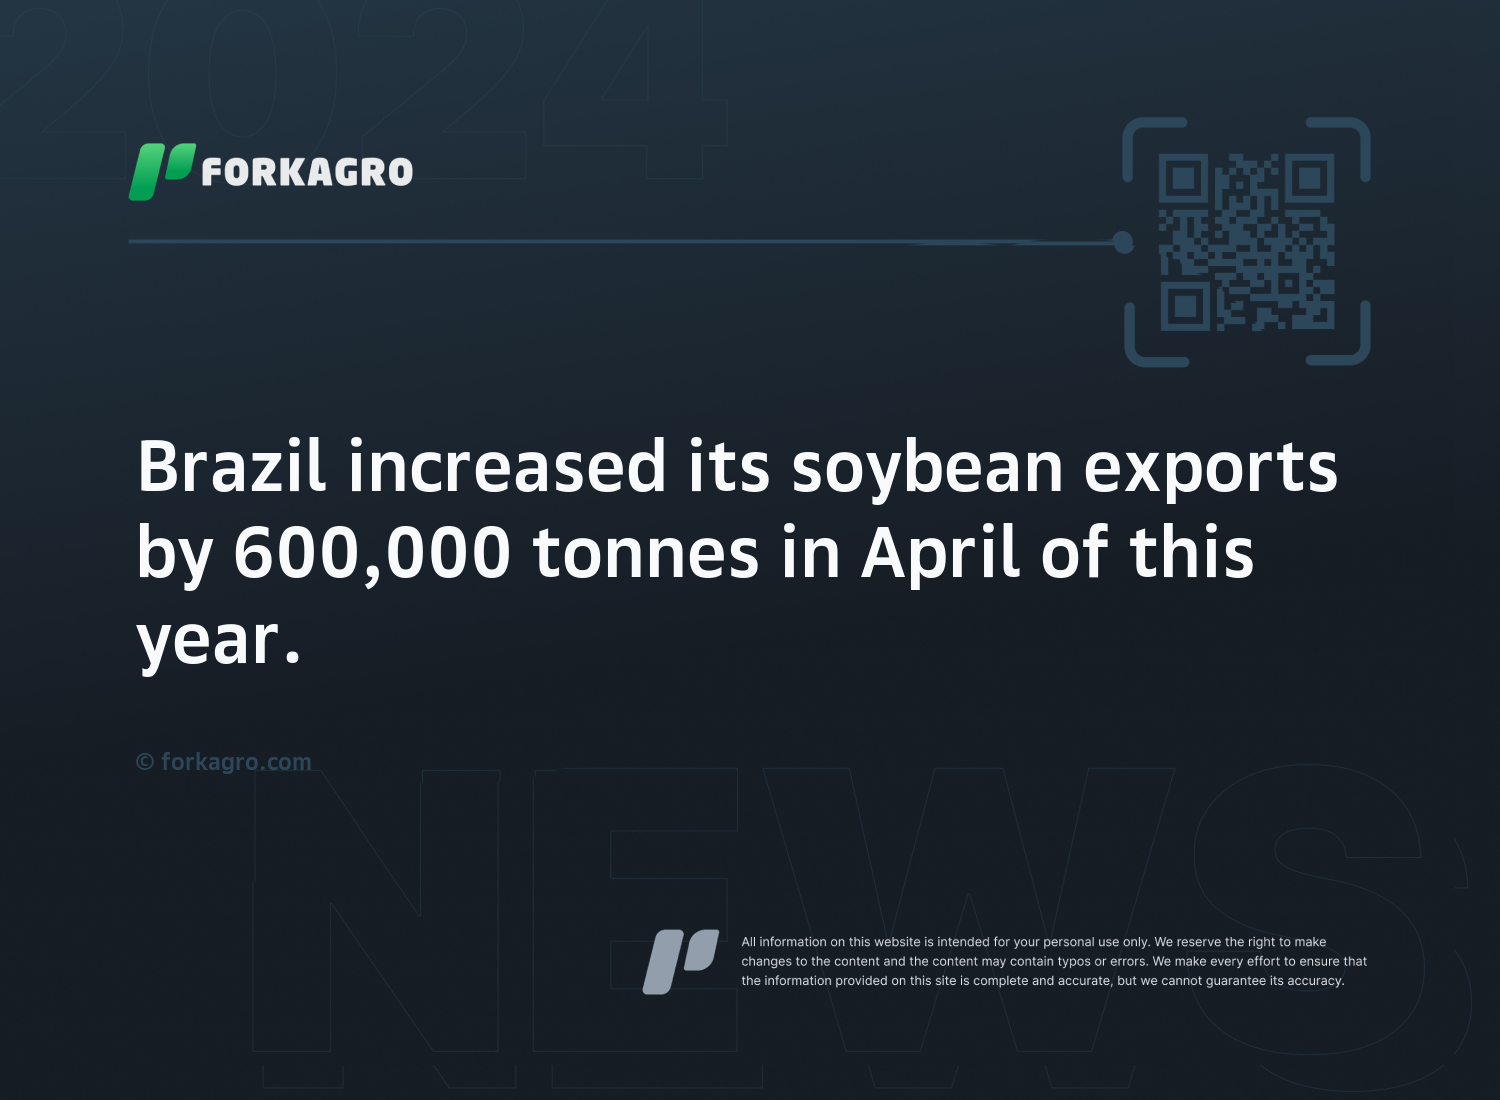 Brazil increased its soybean exports by 600,000 tonnes in April of this year.